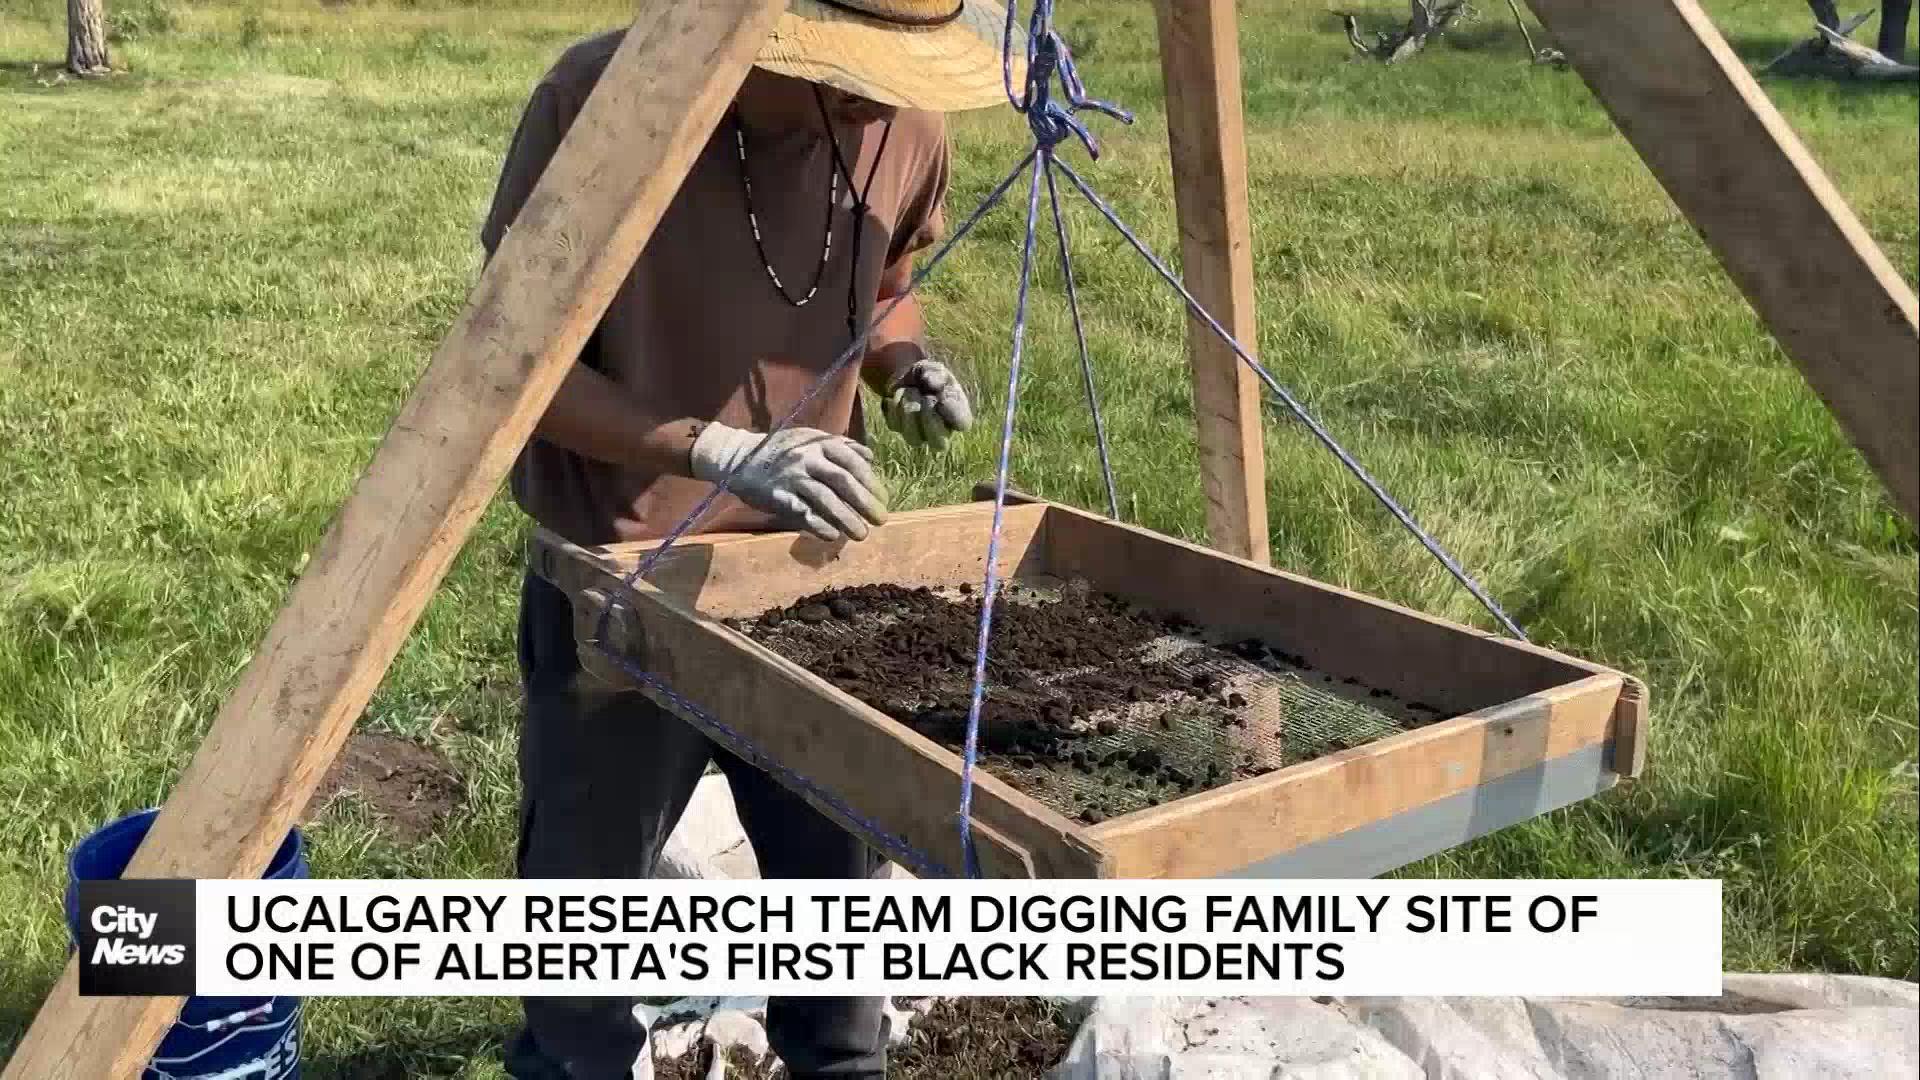 UCalgary research team digging family site of one of Alberta's first Black residents